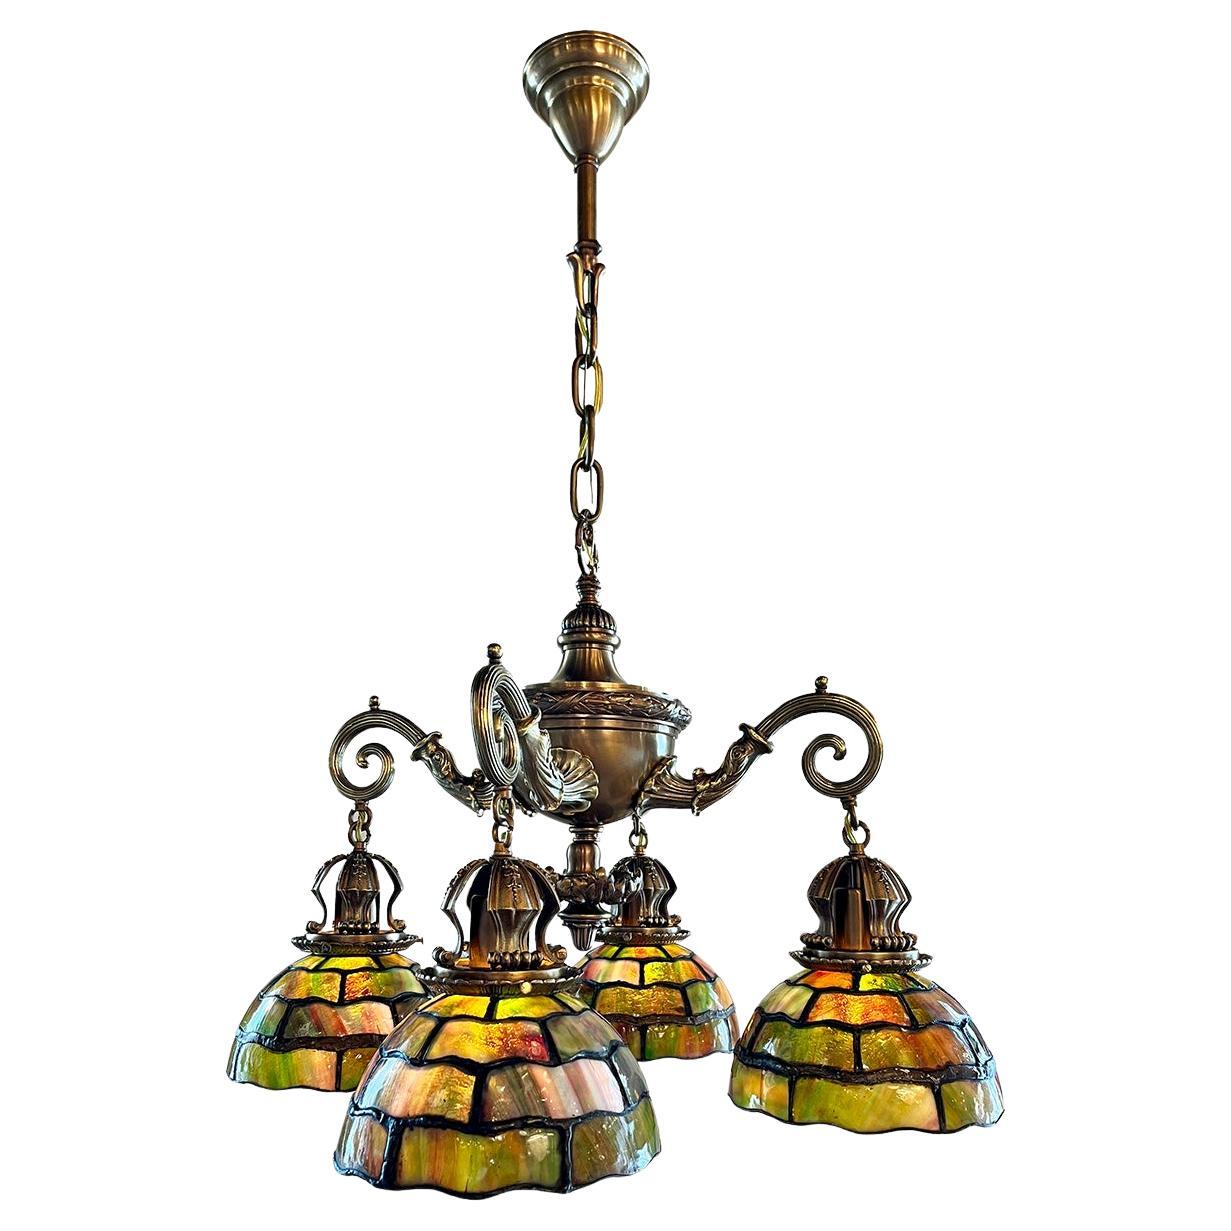 Incredible Early 1900s Beaux Arts Four Light Cast Bronze Chandelier  For Sale